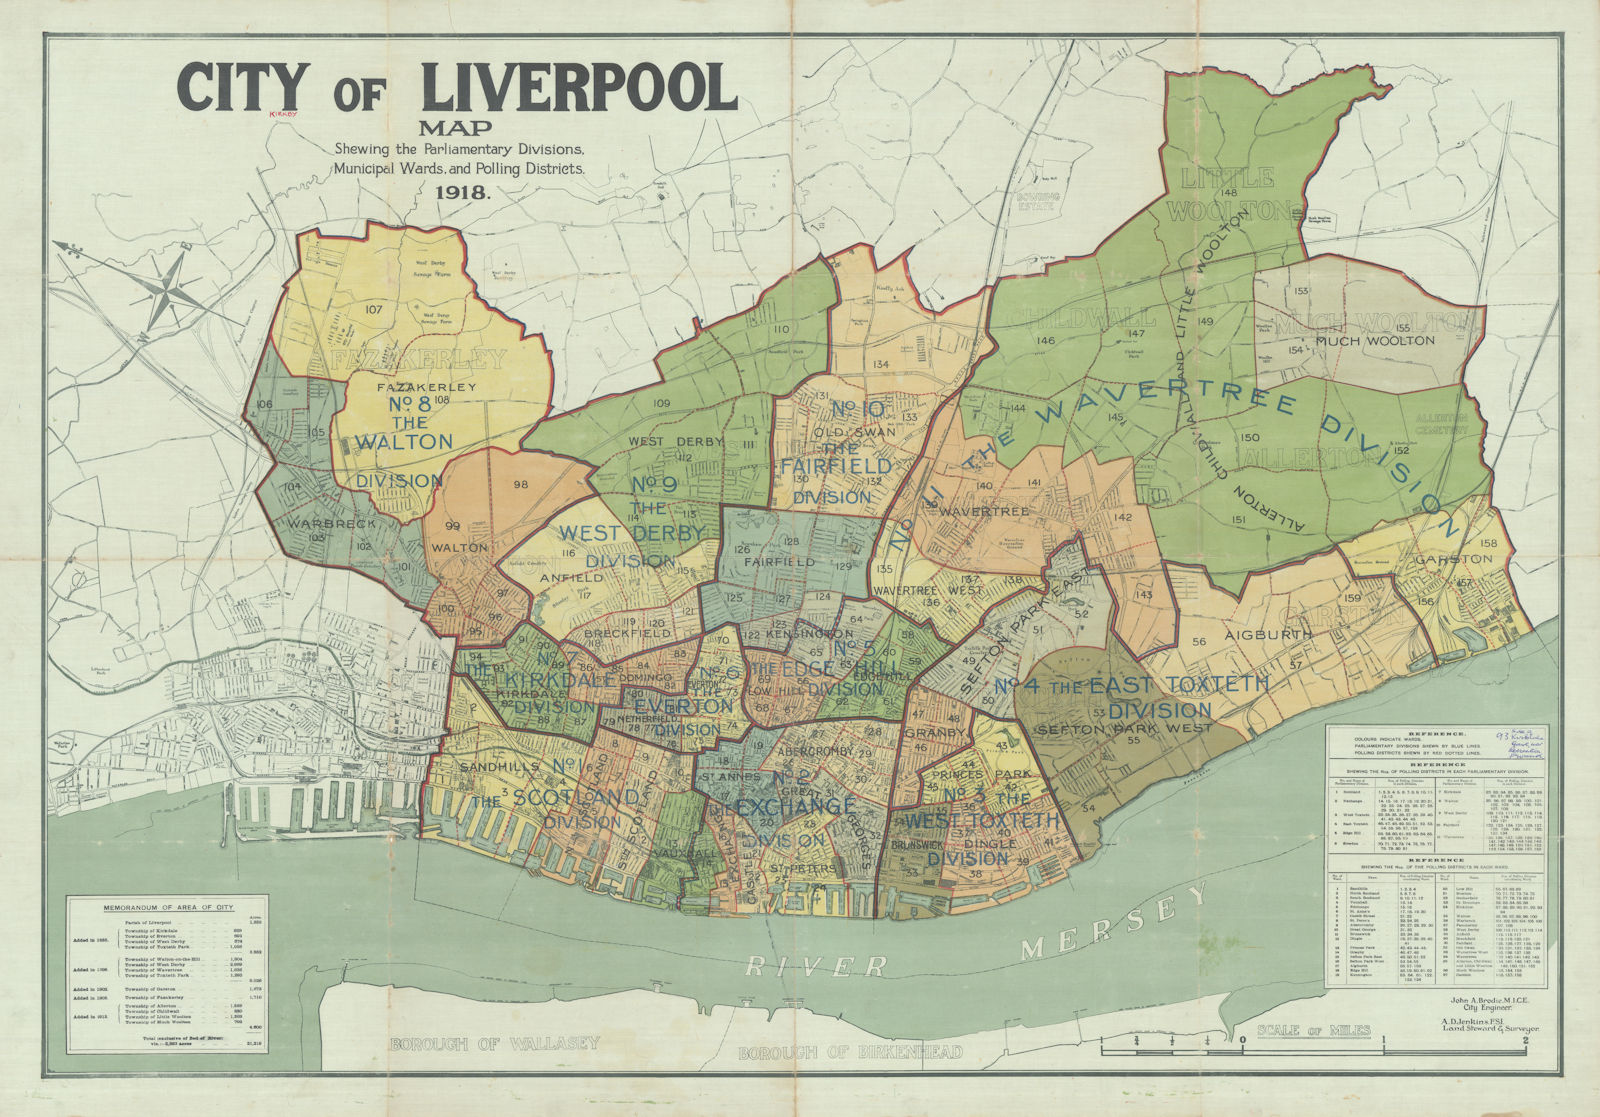 Associate Product City of Liverpool. 80x114cm cloth map by John Brodie, City Engineer 1918